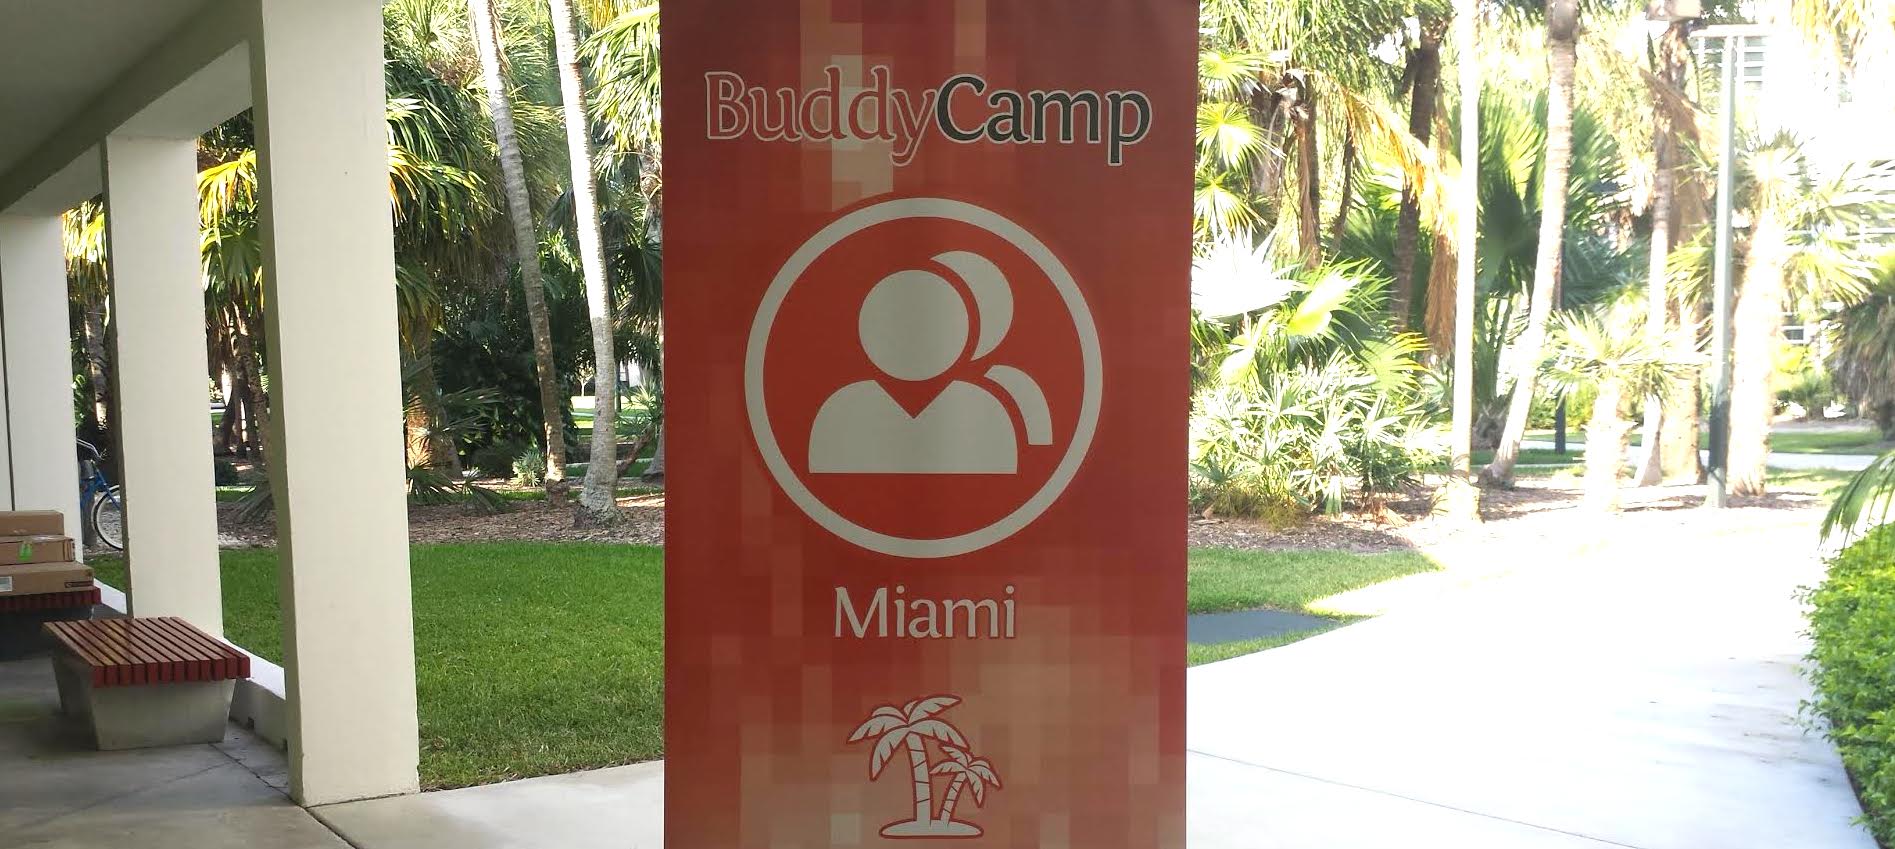 BuddyCamp Miami 2014 In Review: Presentations and Slides From the Event